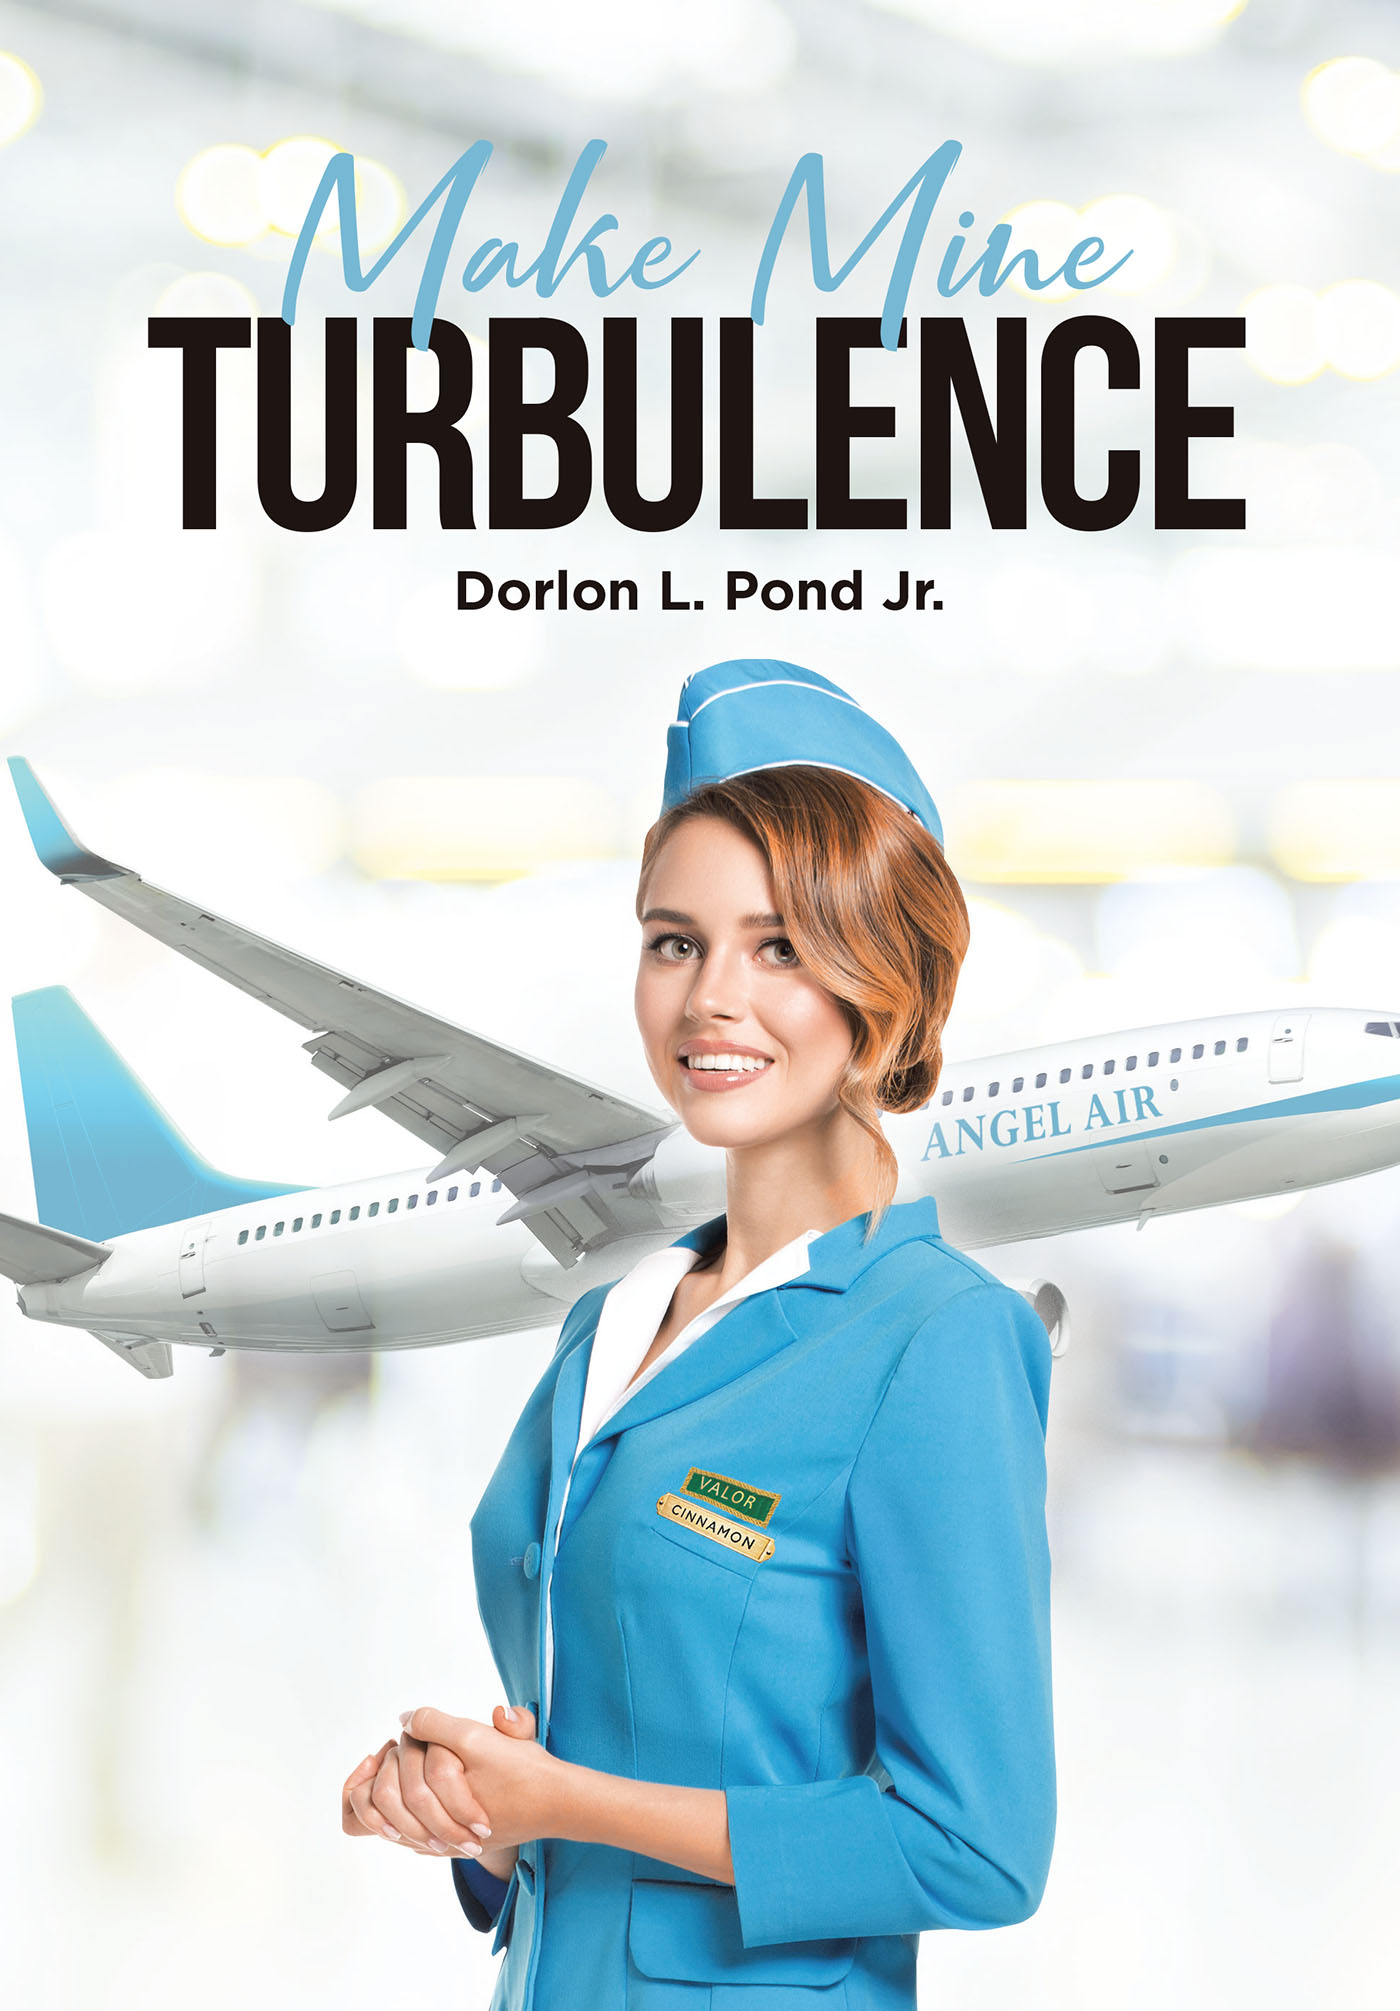 Author Dorlon L. Pond Jr.’s New Book, "Make Mine Turbulence," is a Captivating Novel That Follows Two Flight Attendants as Unexpected Events Unfold